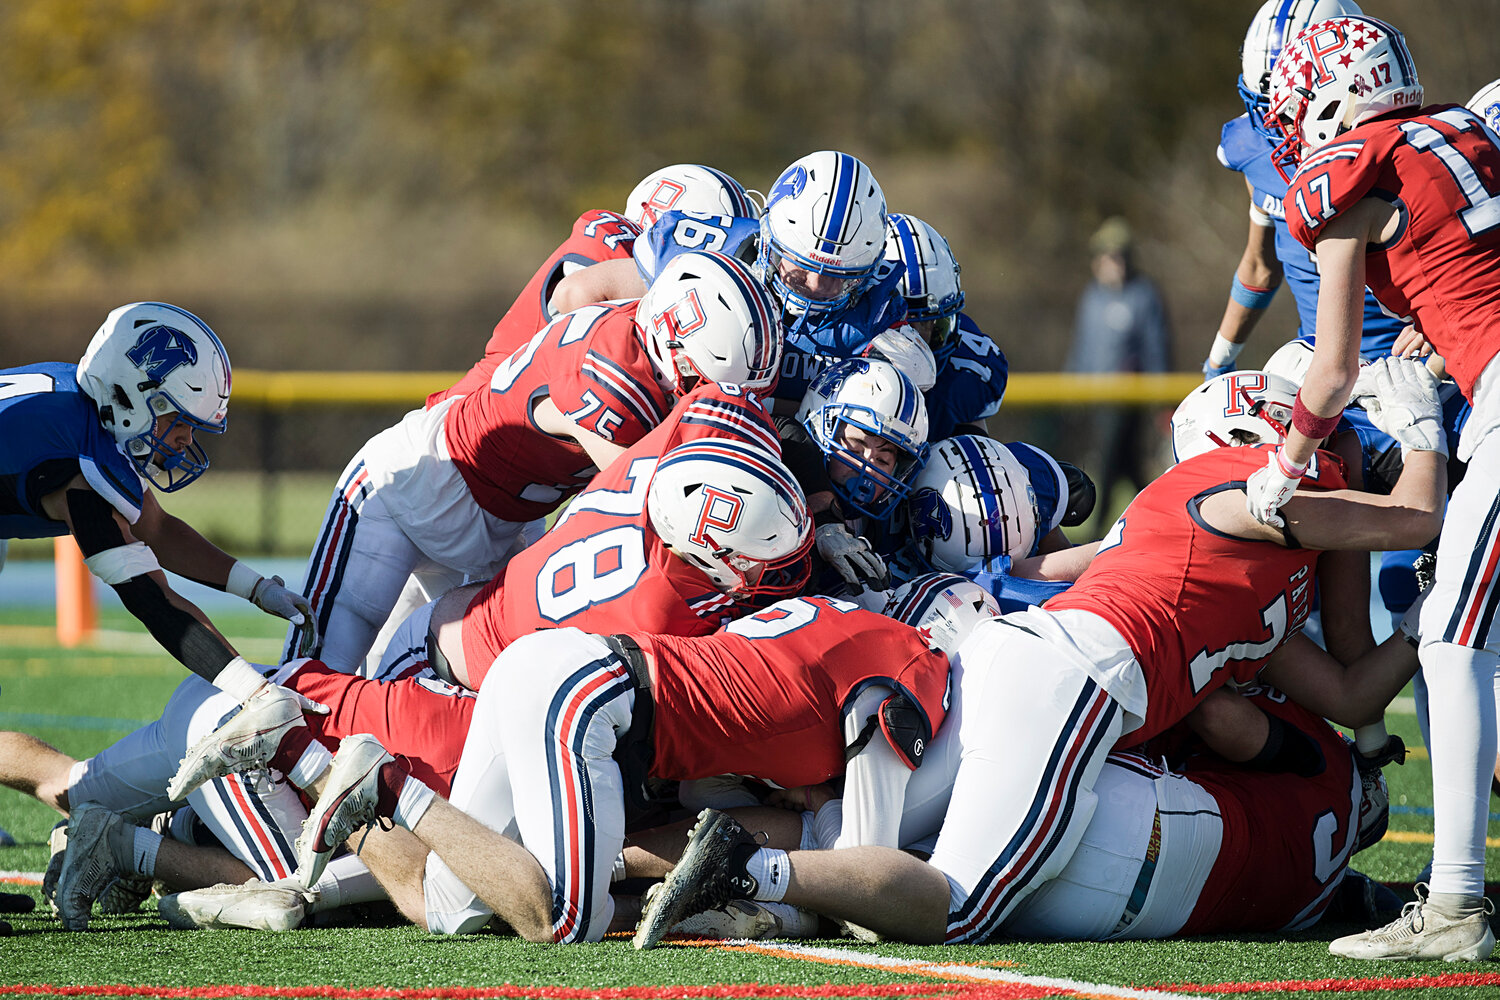 The Patriots’ offense forces its way over the goal line to score in the first half of Thursday's Thanksgiving Day match against Middletown.